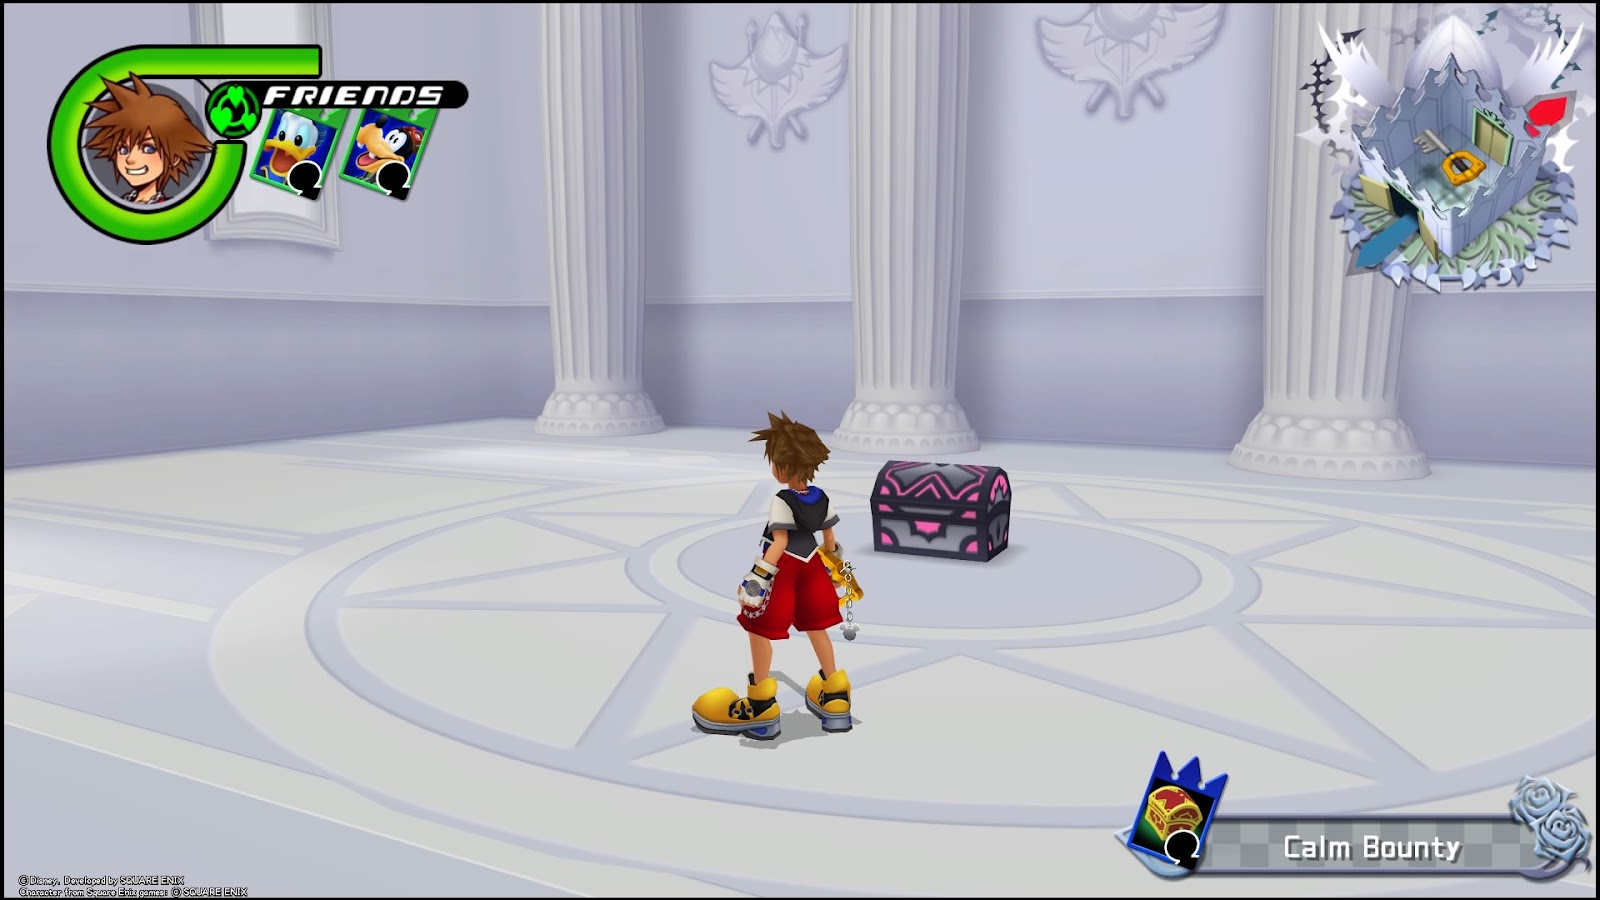 Provided you’ve beaten the game as Sora and Riku, you’ll find Ultima Weapon in a Calm Bounty room | Kingdom Hearts Re:Chain of Memories